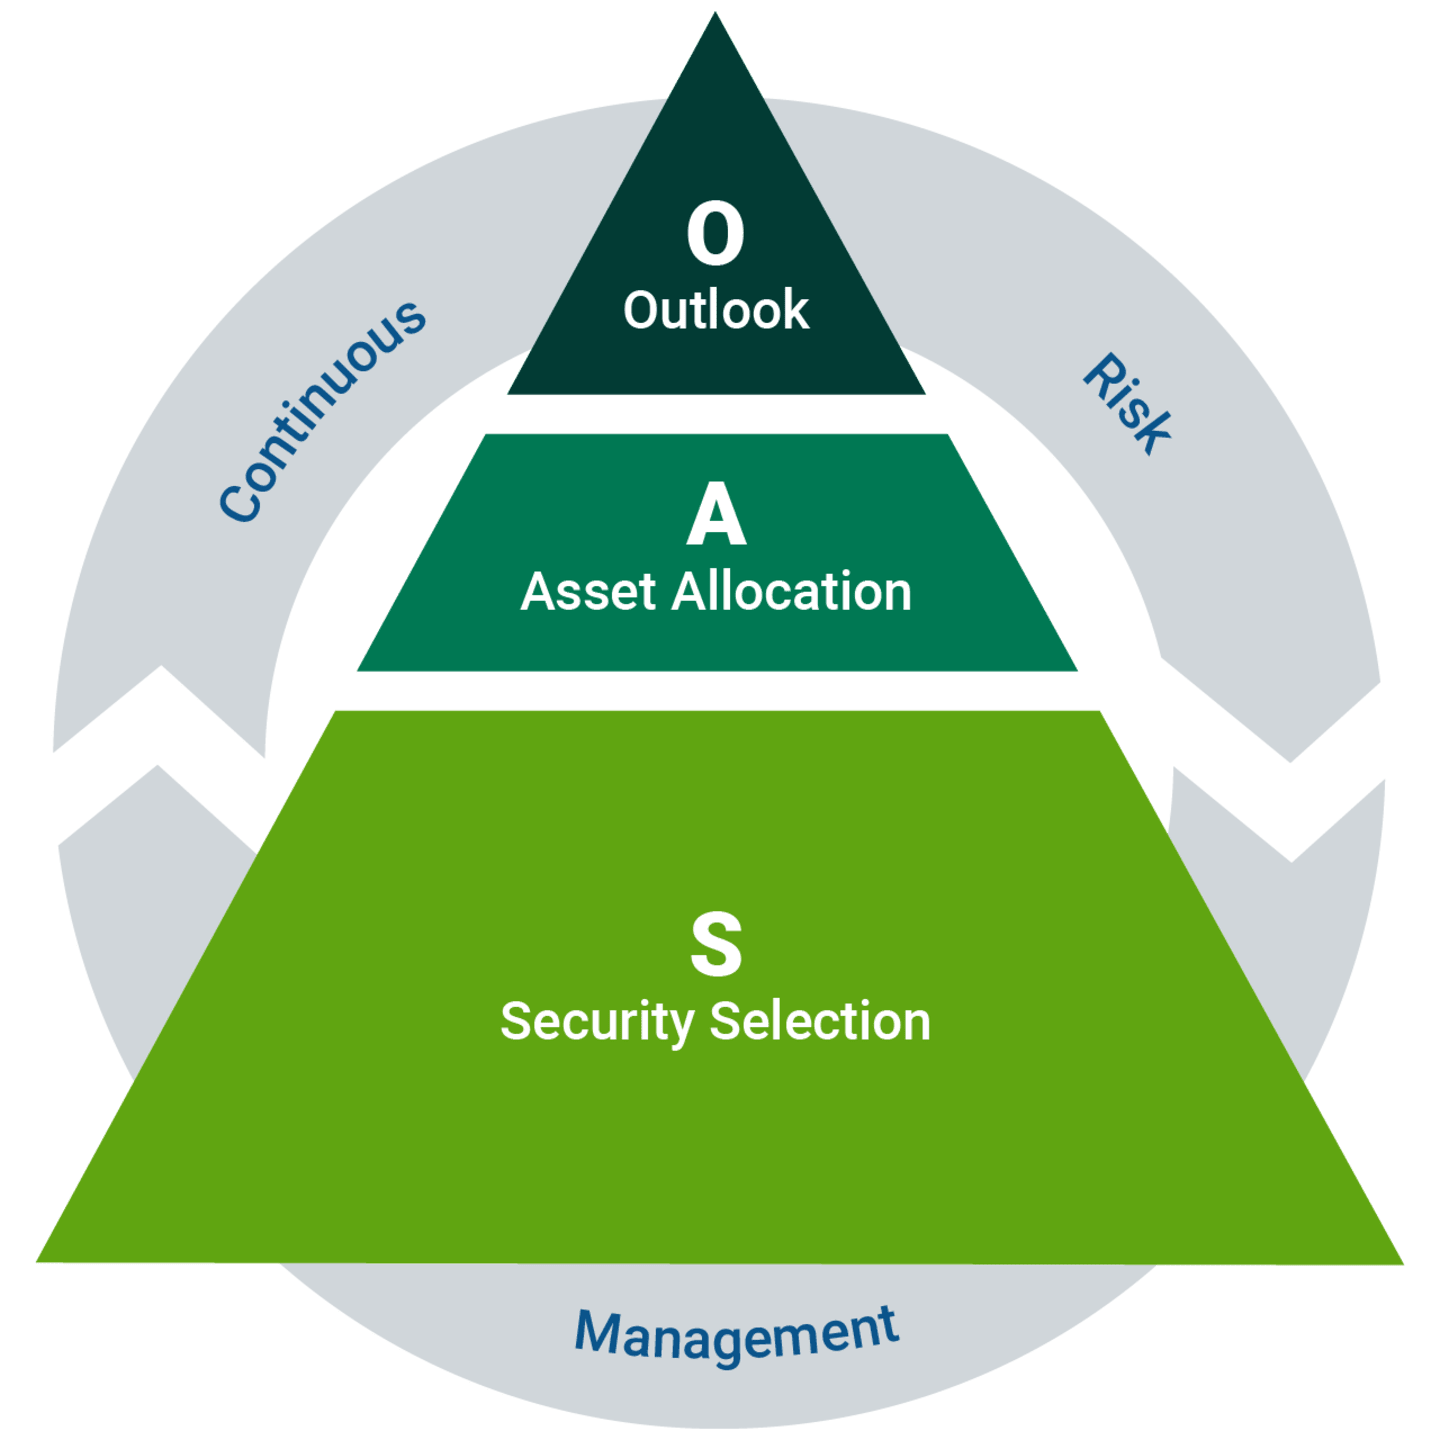 Continuous Risk Management circles around Outlook, Asset Allocation, and Security Selection. 